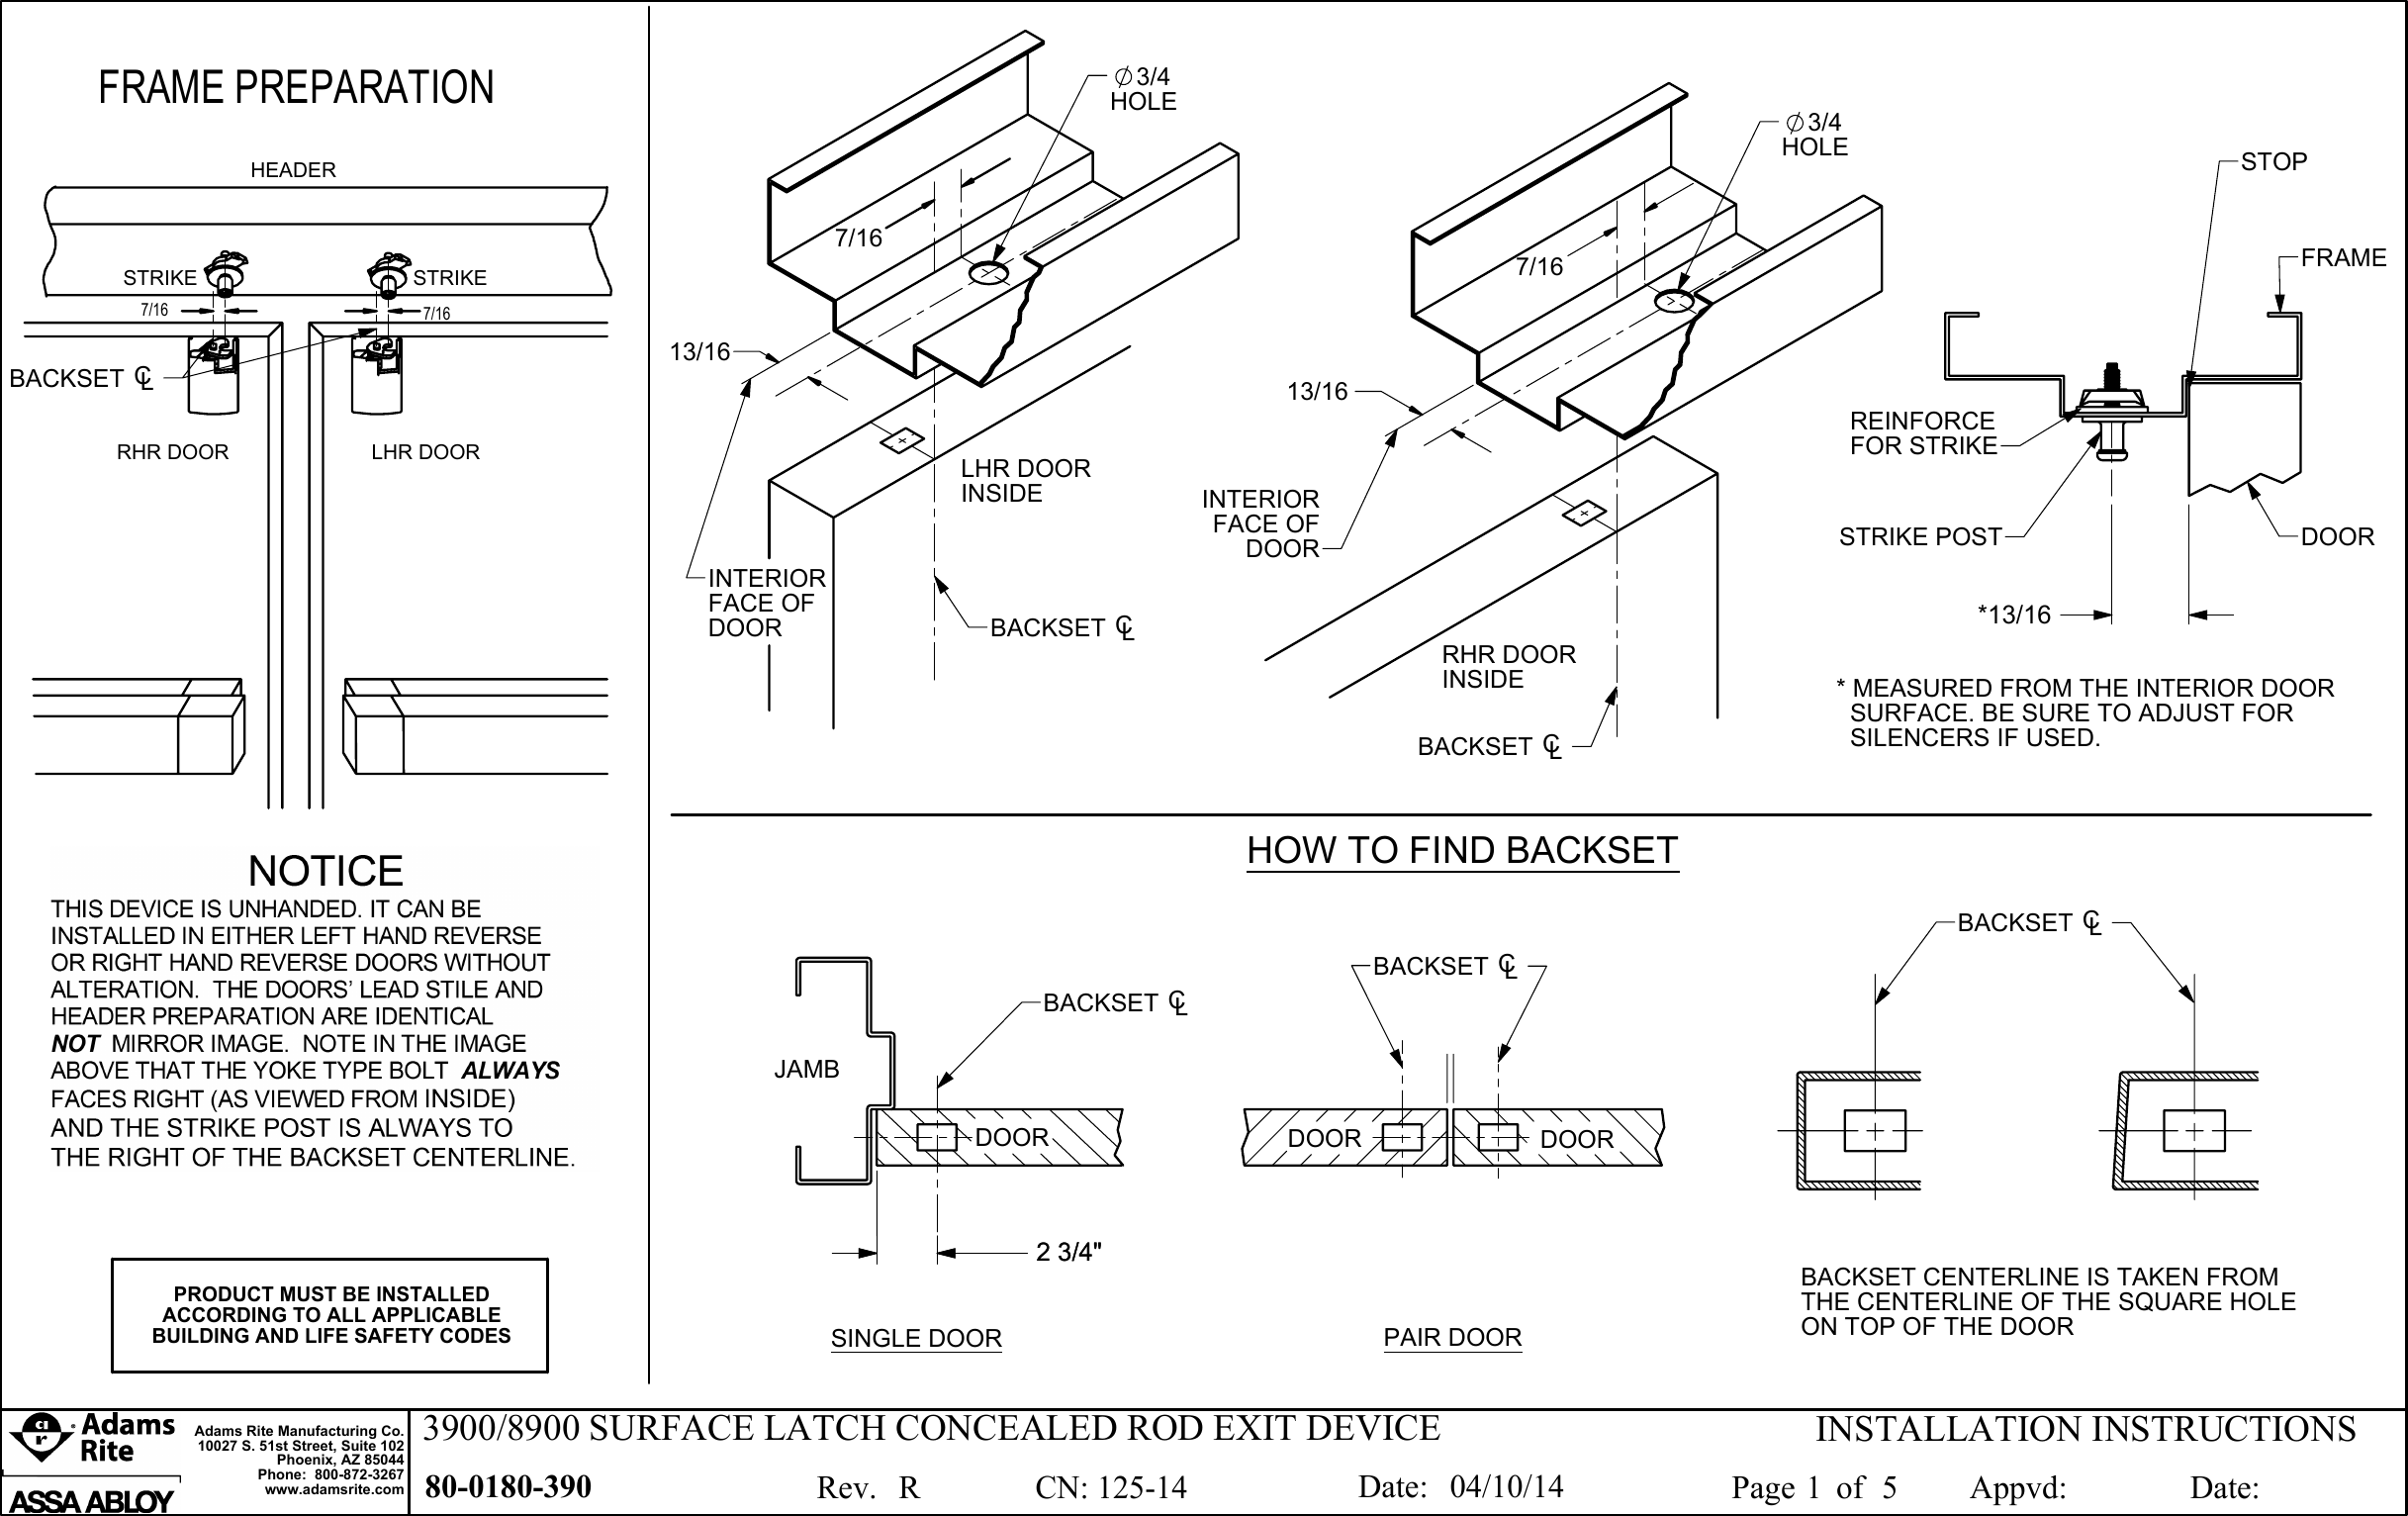 Page 1 of 5 - Adams Rite 80-0180-390_R 3900/8900 Surface Latch Concealed Rod Exit Device Installation Instructions 3900 8900 80-0180-390 R